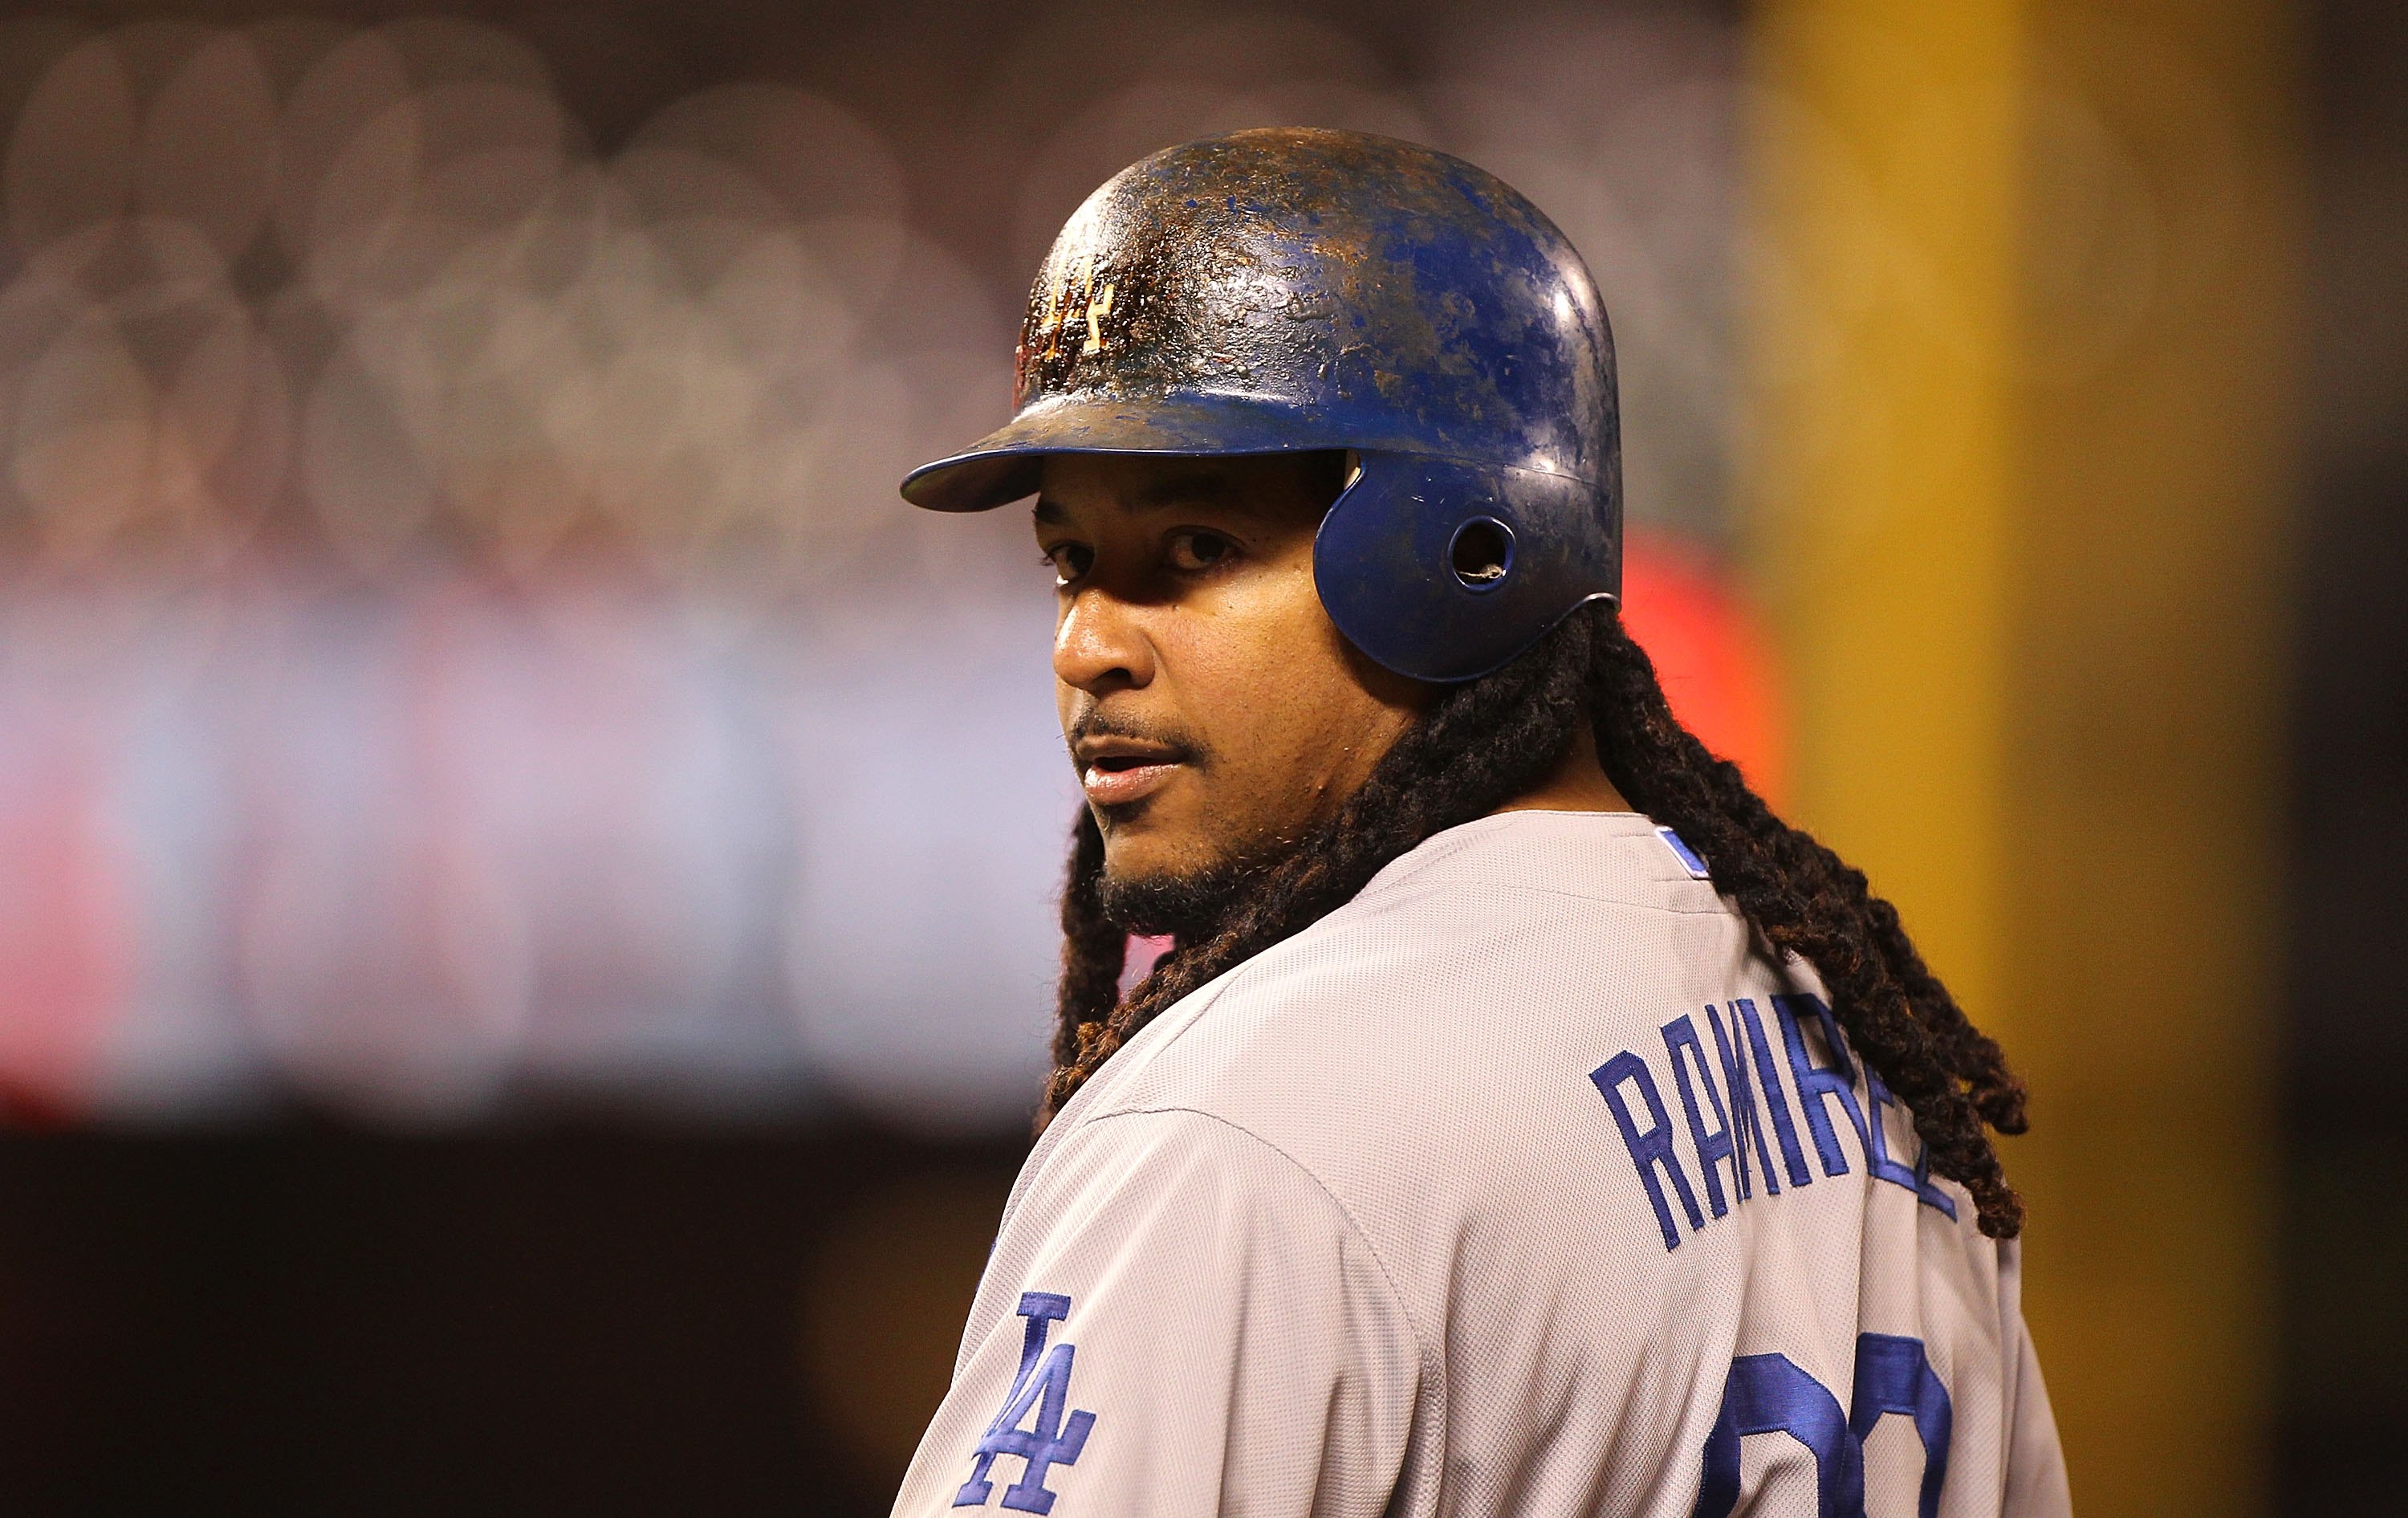 Manny Ramirez's son to play pro baseball in Connecticut